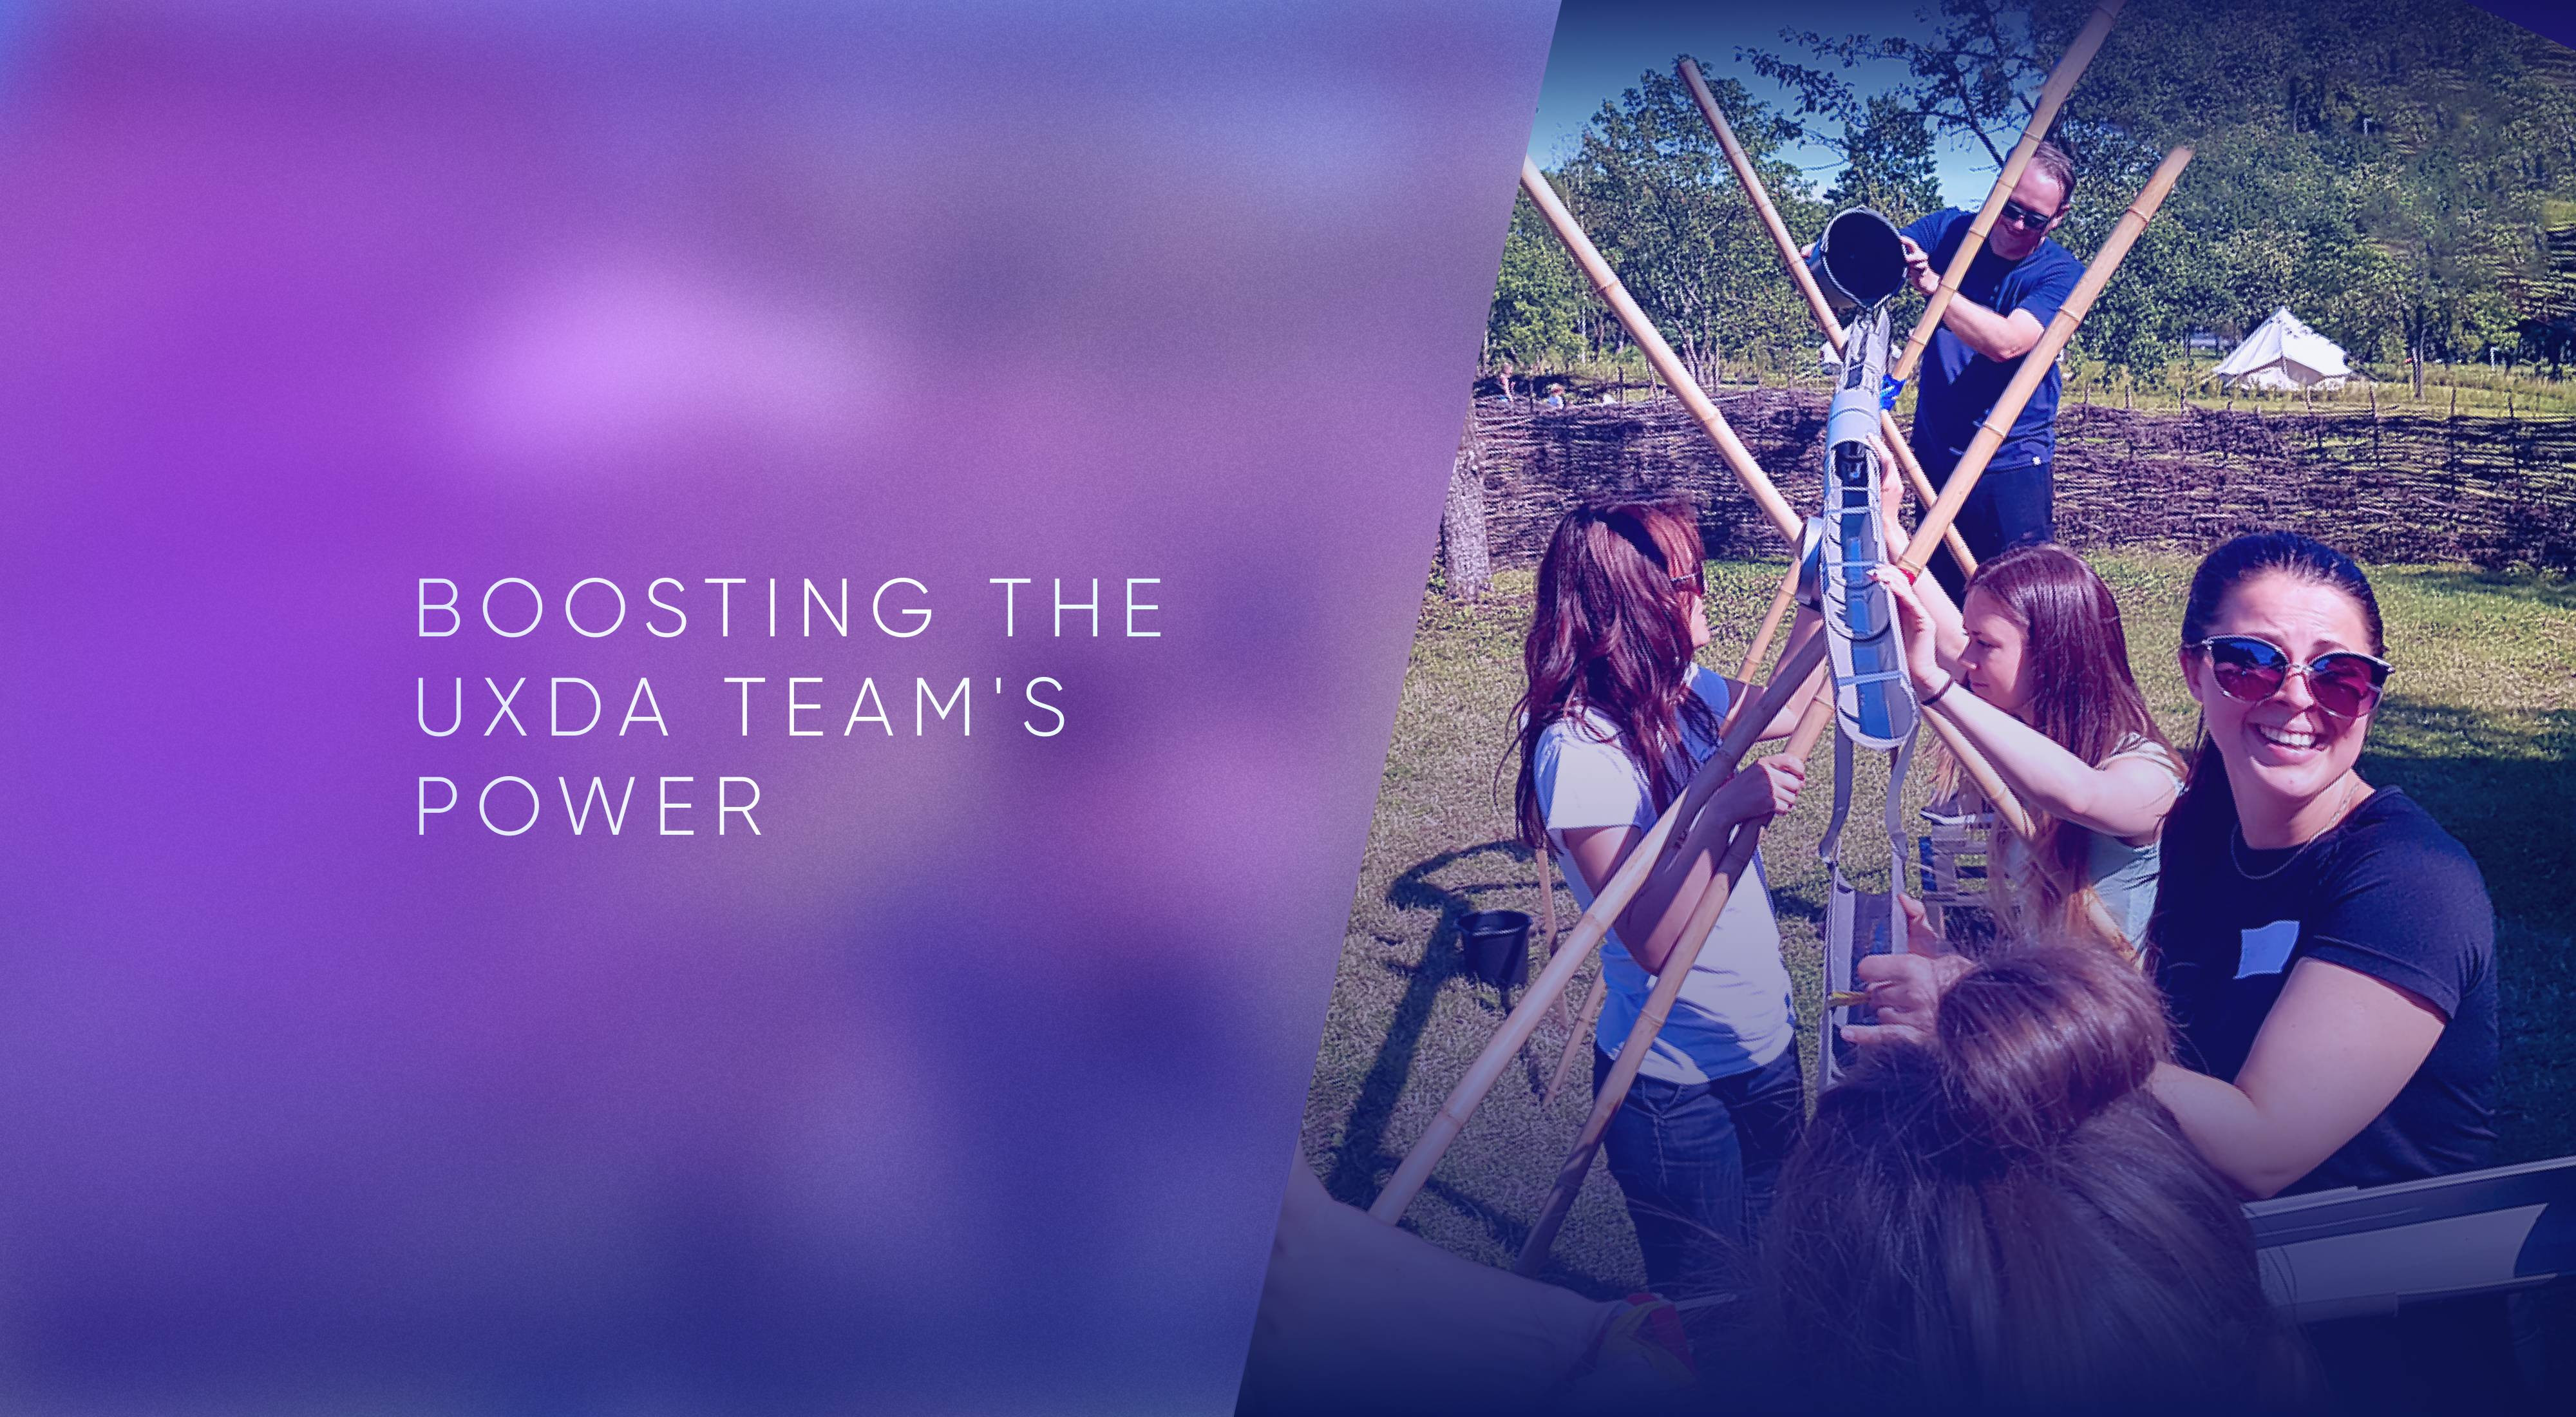 Boosting The UXDA Team's Power